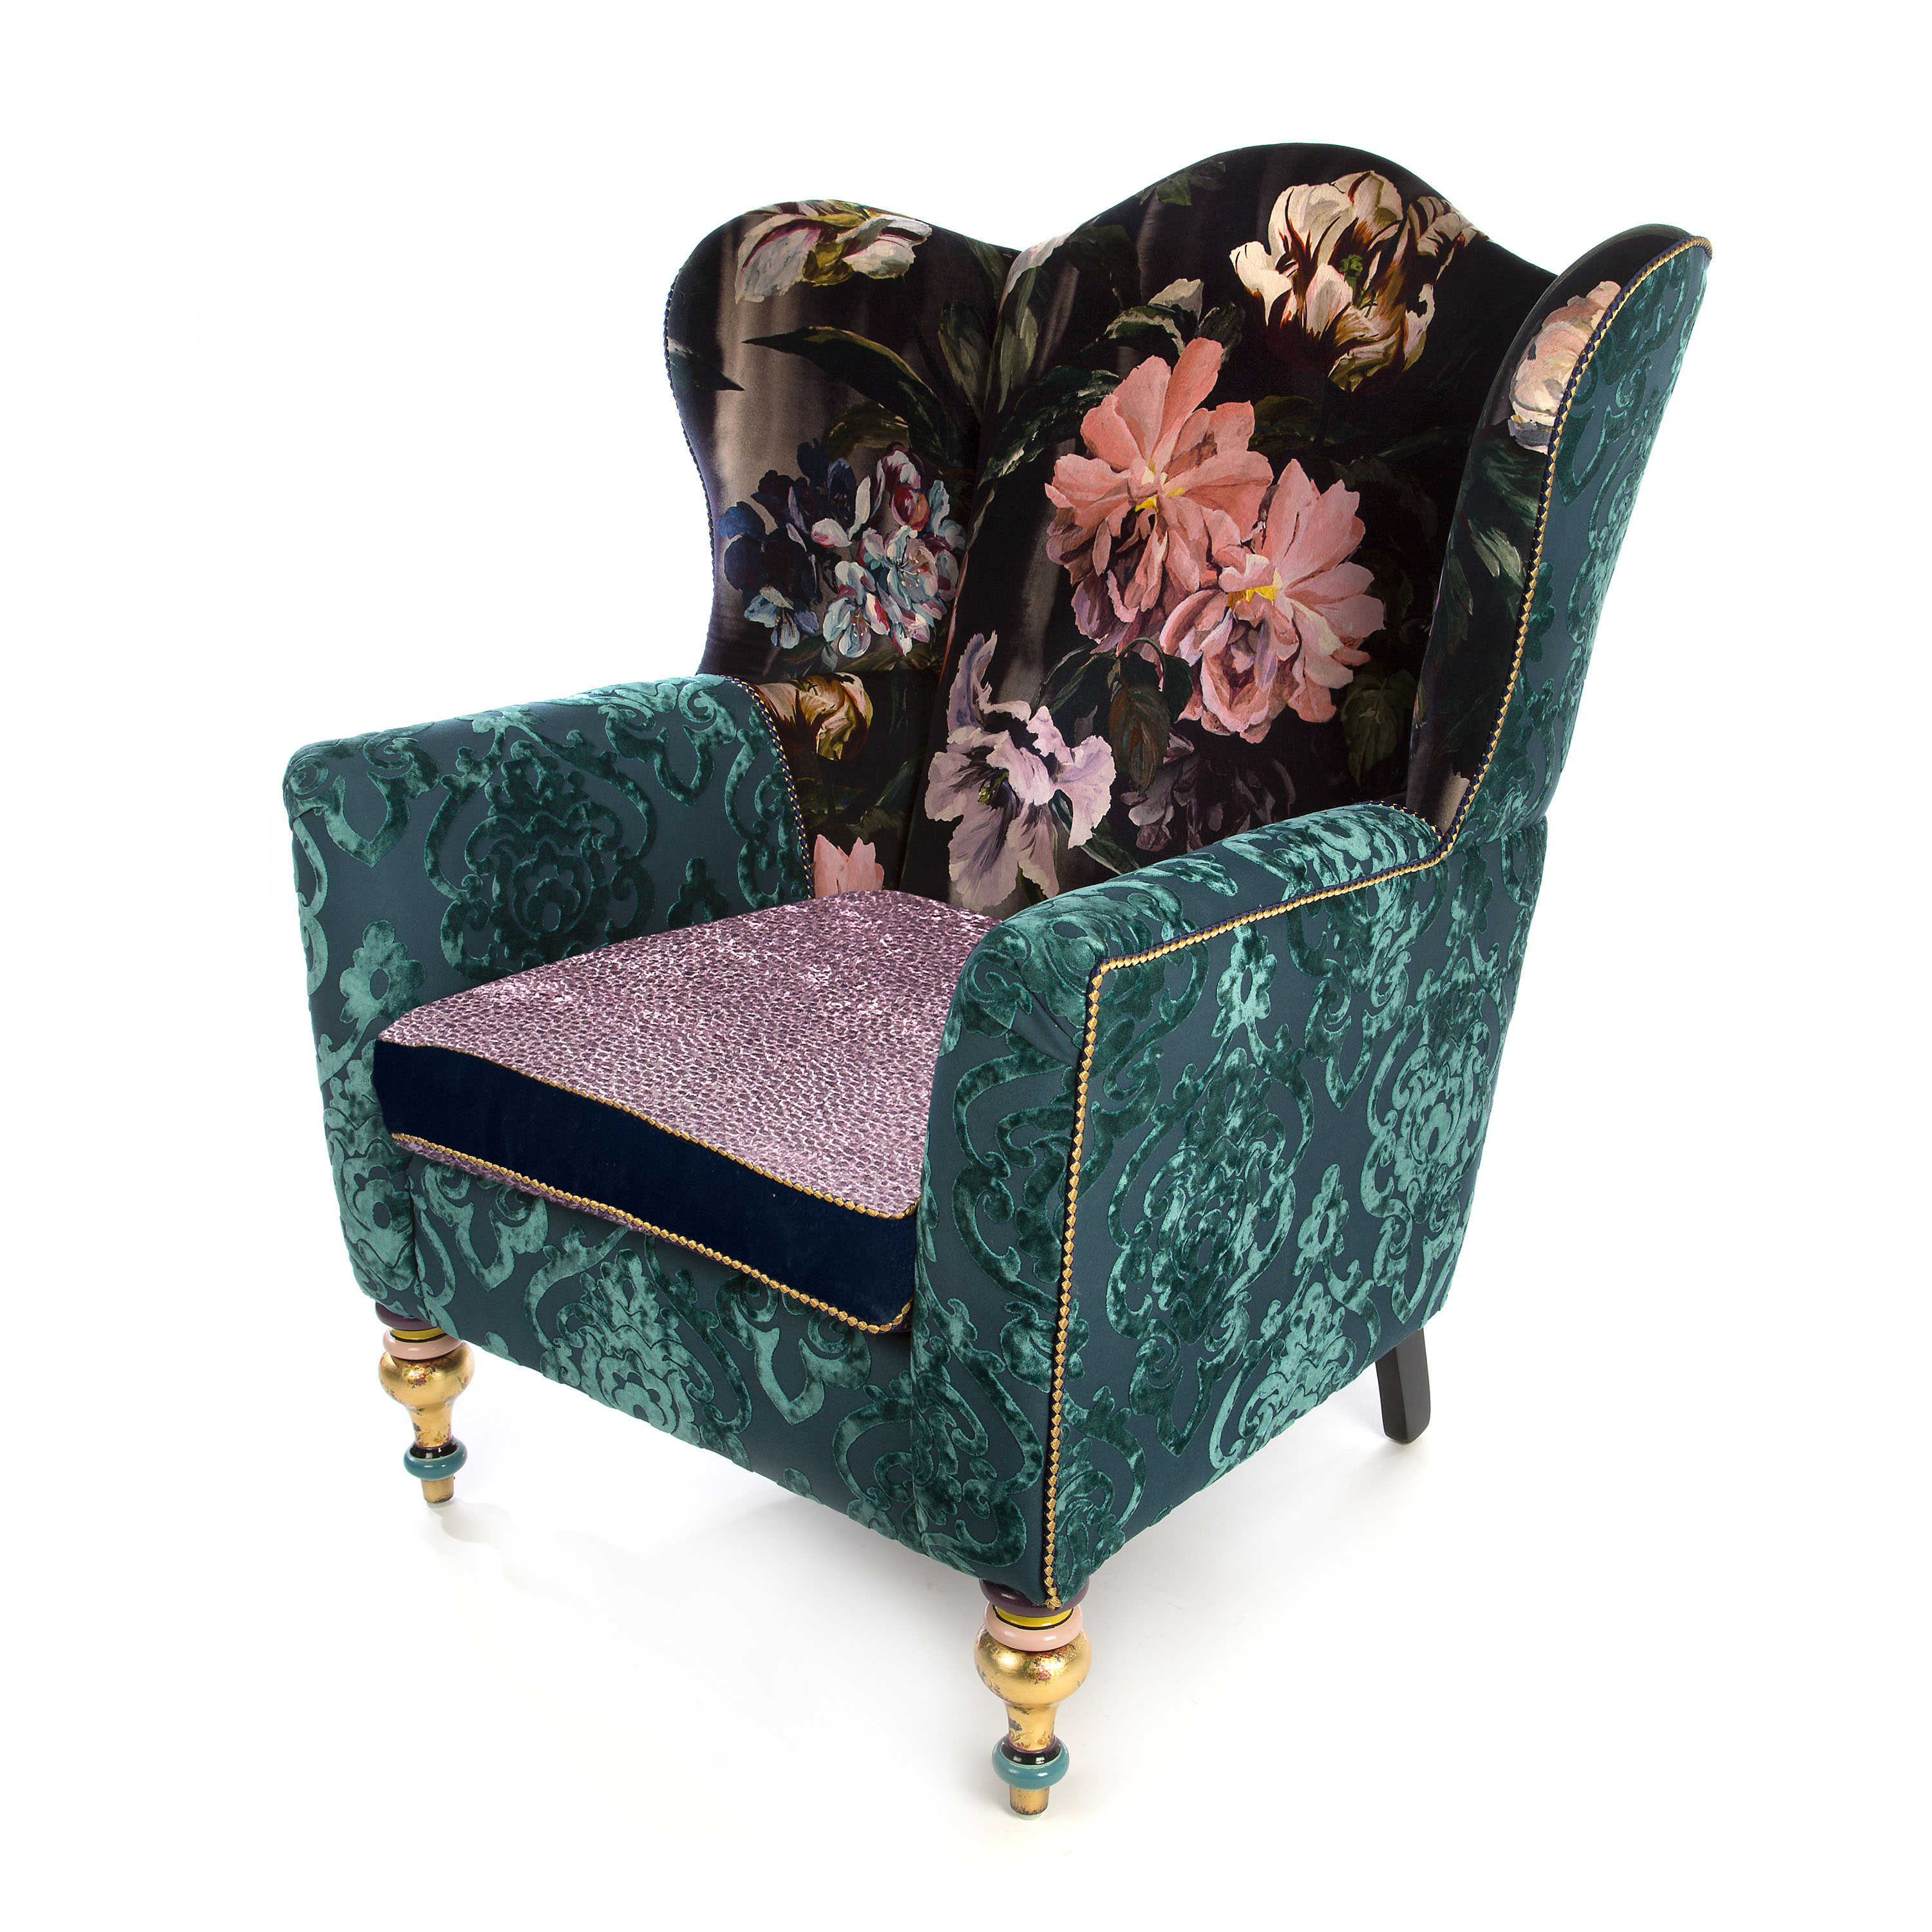 Moonlight Garden Off the Record Wing Chair mackenzie-childs Panama 0